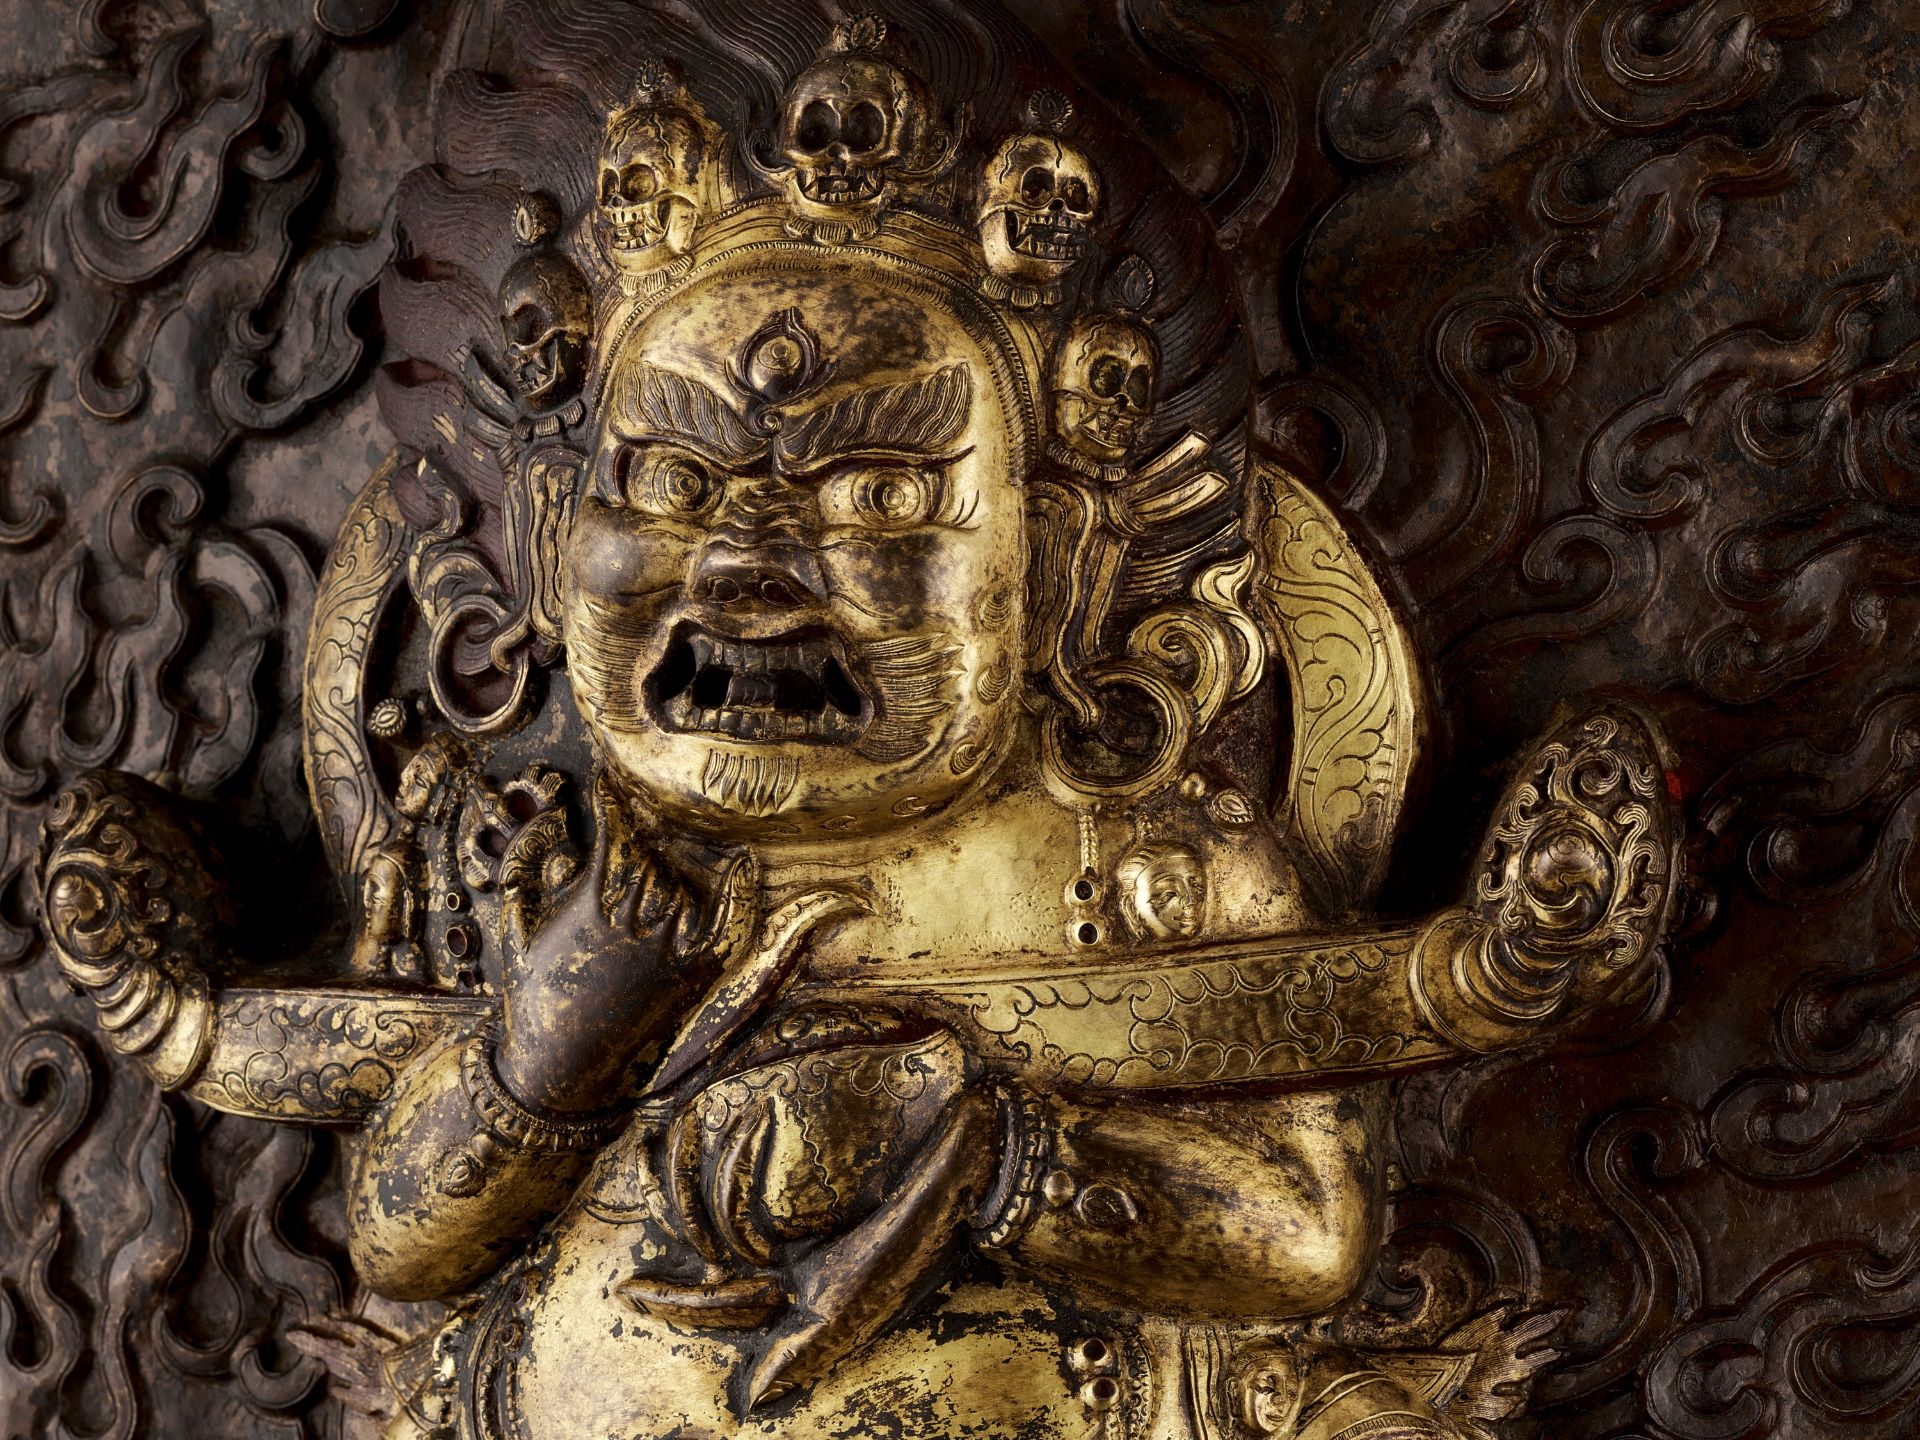 A LARGE GILT-COPPER REPOUSSE RELIEF OF MAHAKALA, 18TH-19TH CENTURY - Image 4 of 8